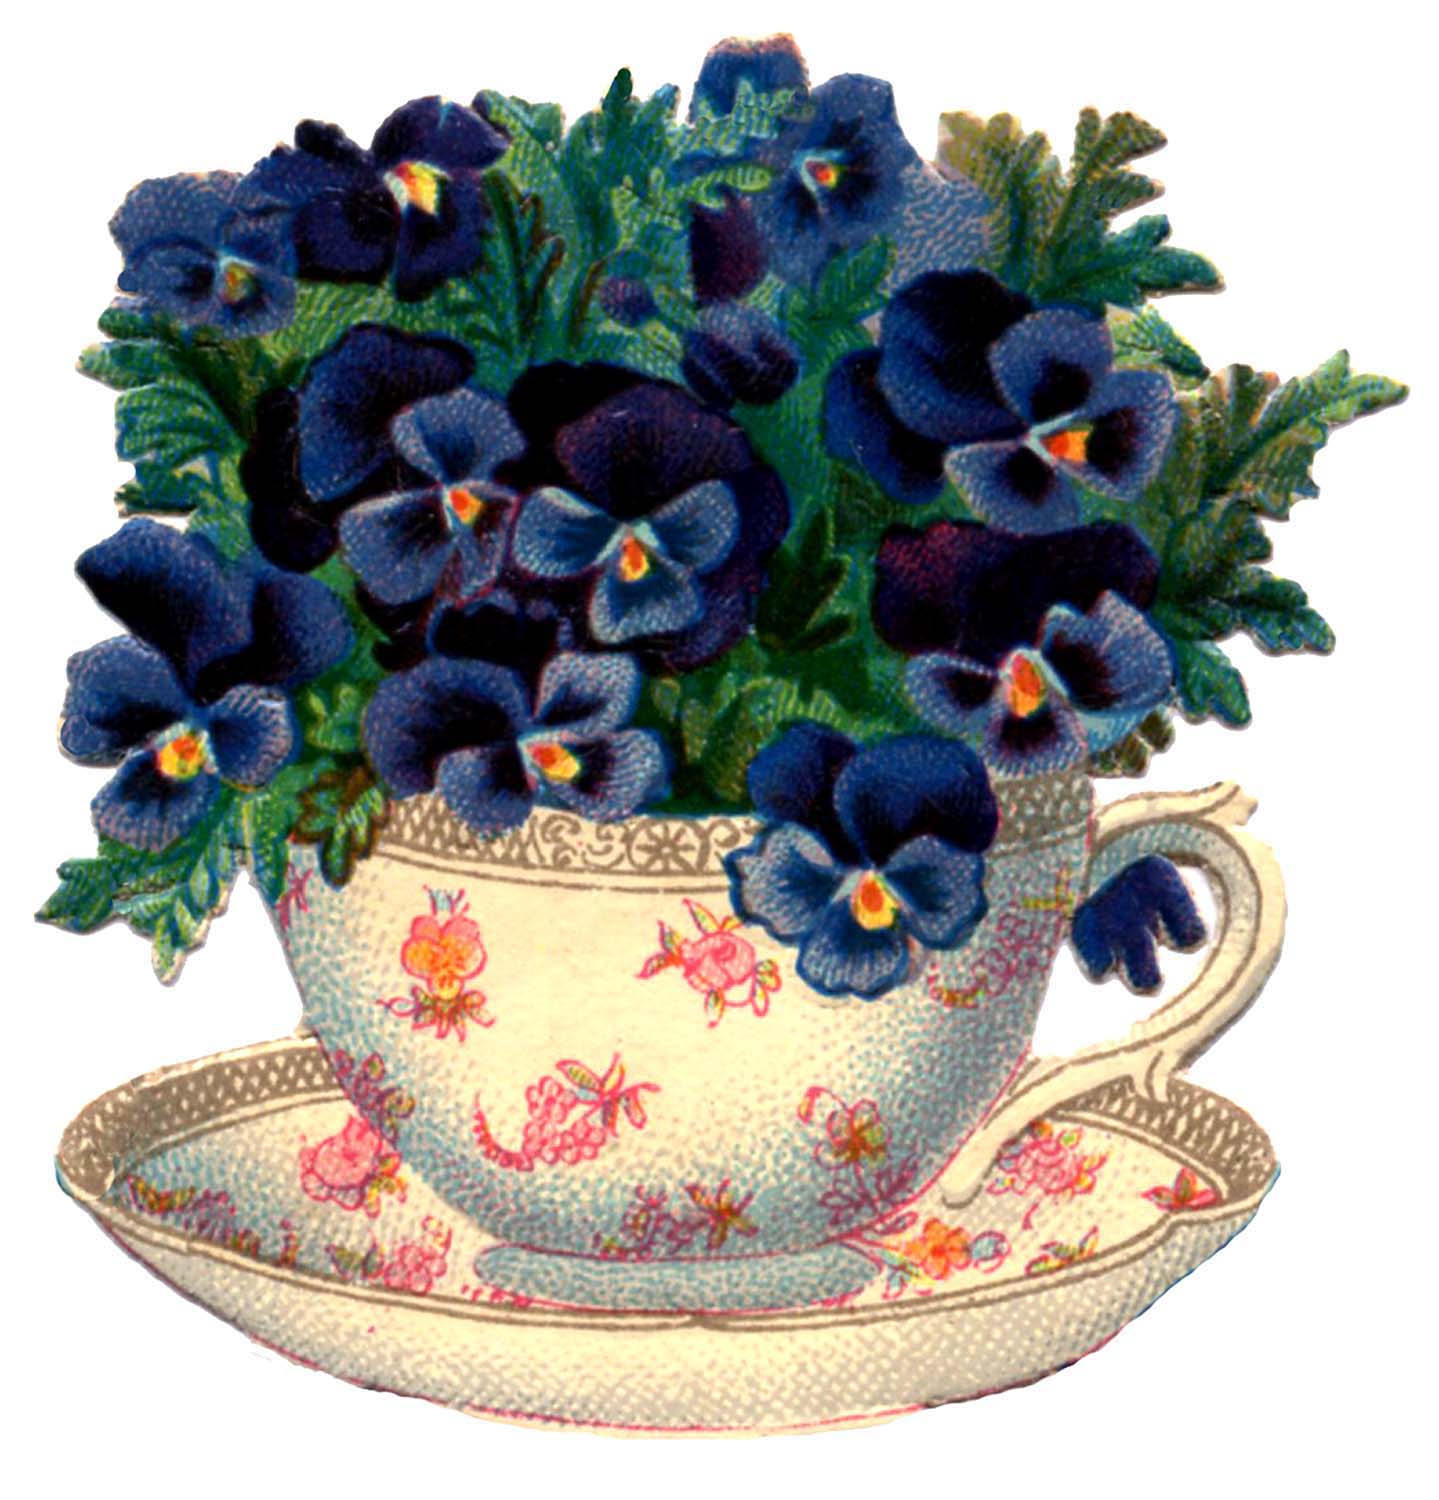 Teacup-Pansy-Vintage-Image-Graphics-Fairy